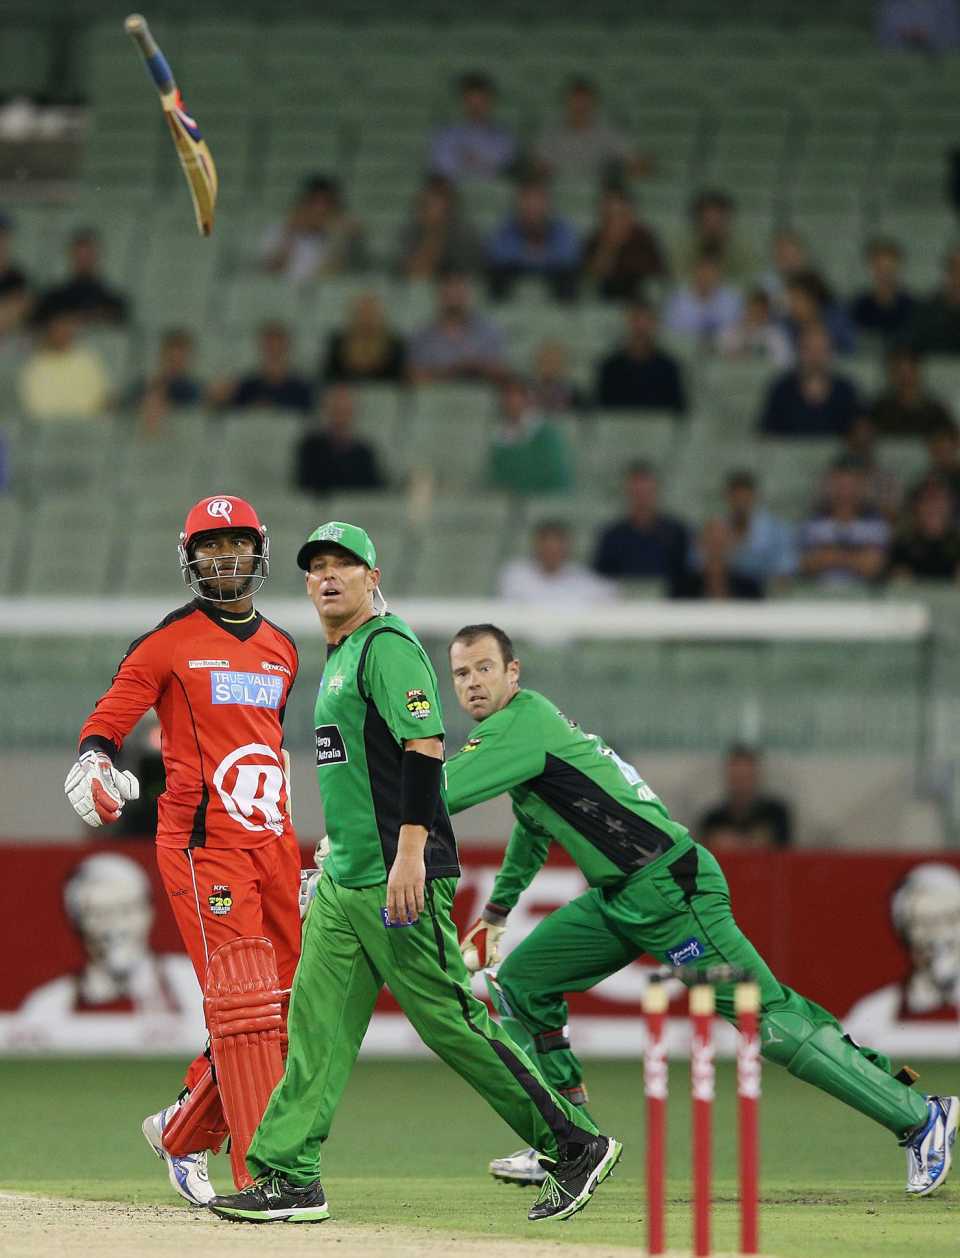 Marlon Samuels throws his bat in the air after getting hit by a throw from Shane Warne, Melbourne Stars v Melbourne Renegades, Big Bash League, MCG, January 6, 2013